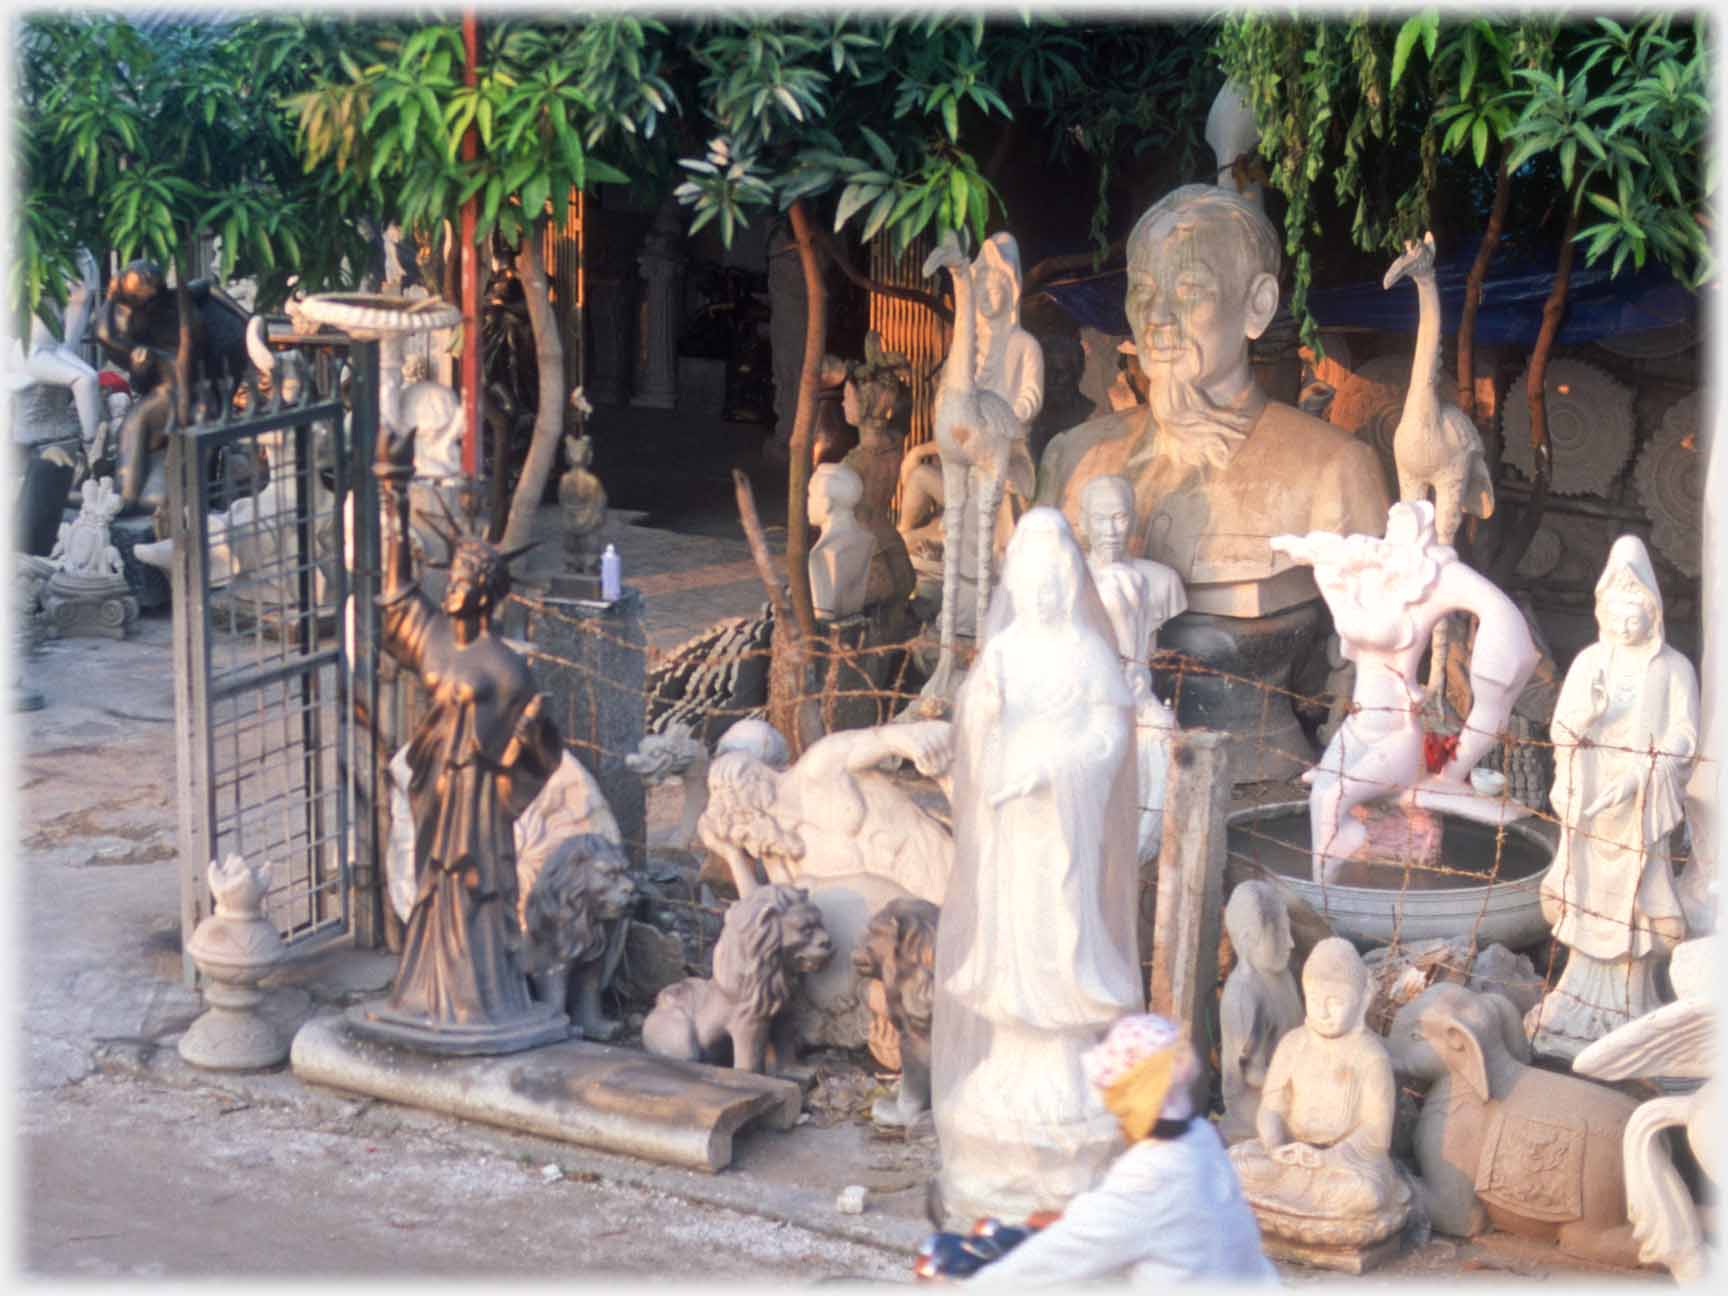 Yard of various statues in various condition dominated by large one of Uncle Ho.